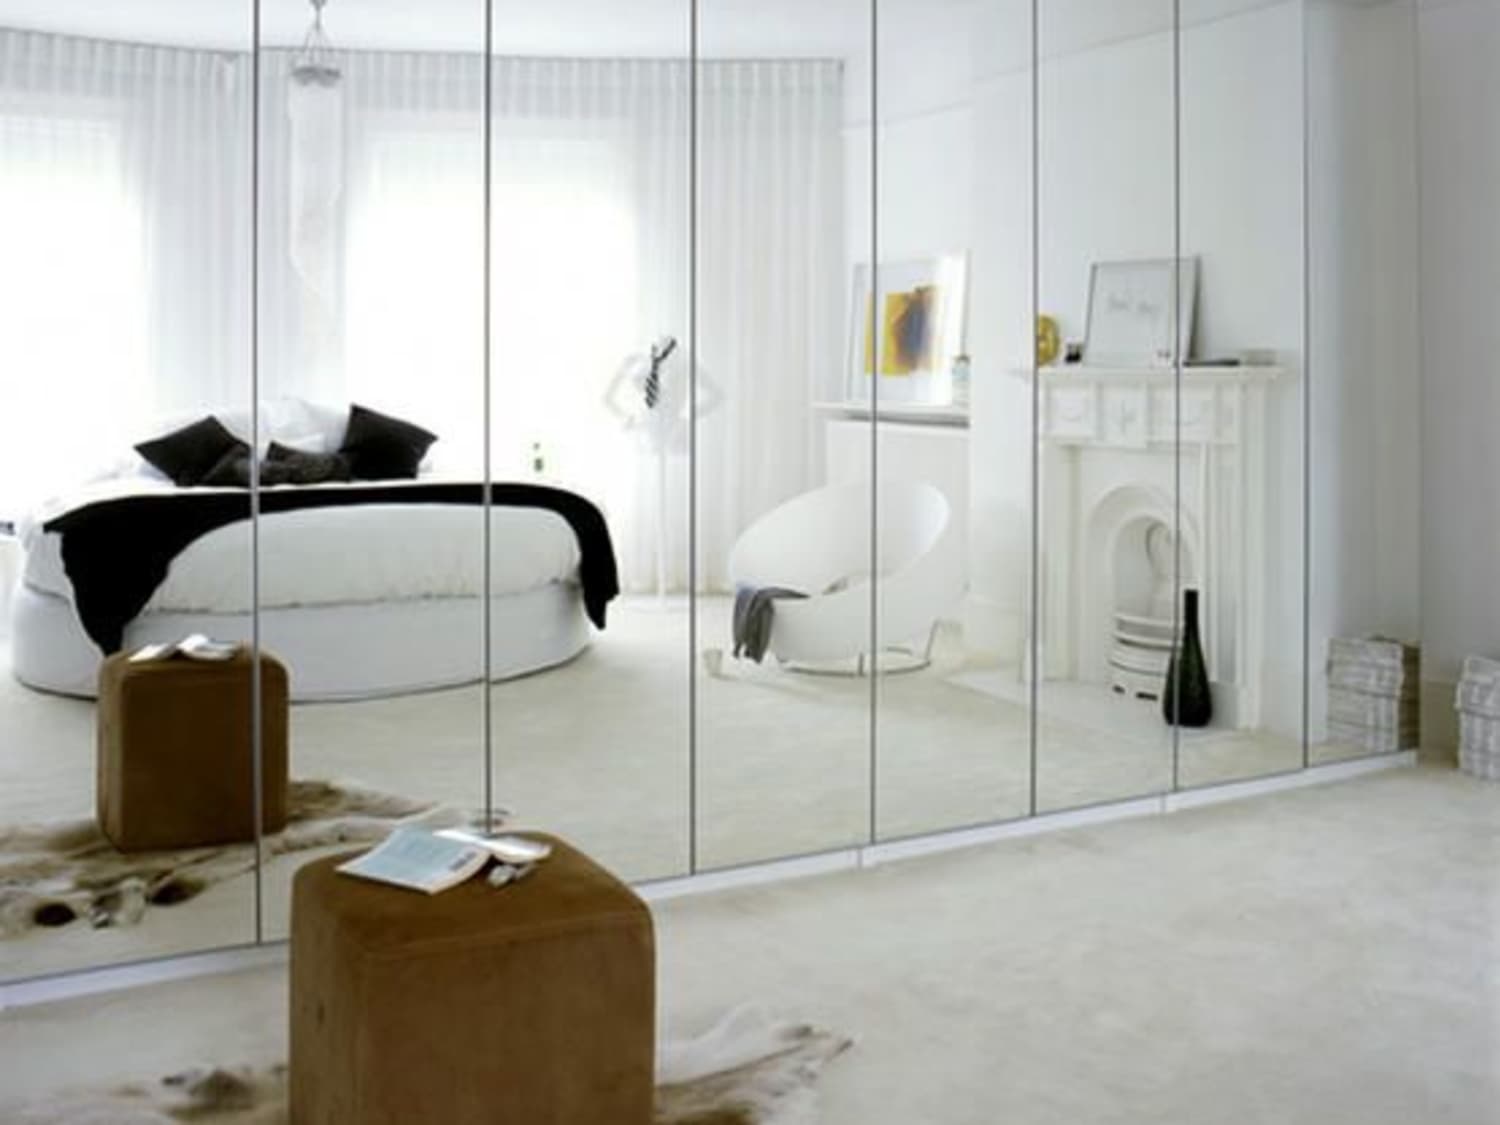 Plagued With Dated Mirrored Walls 5 Design Ideas To Make Them